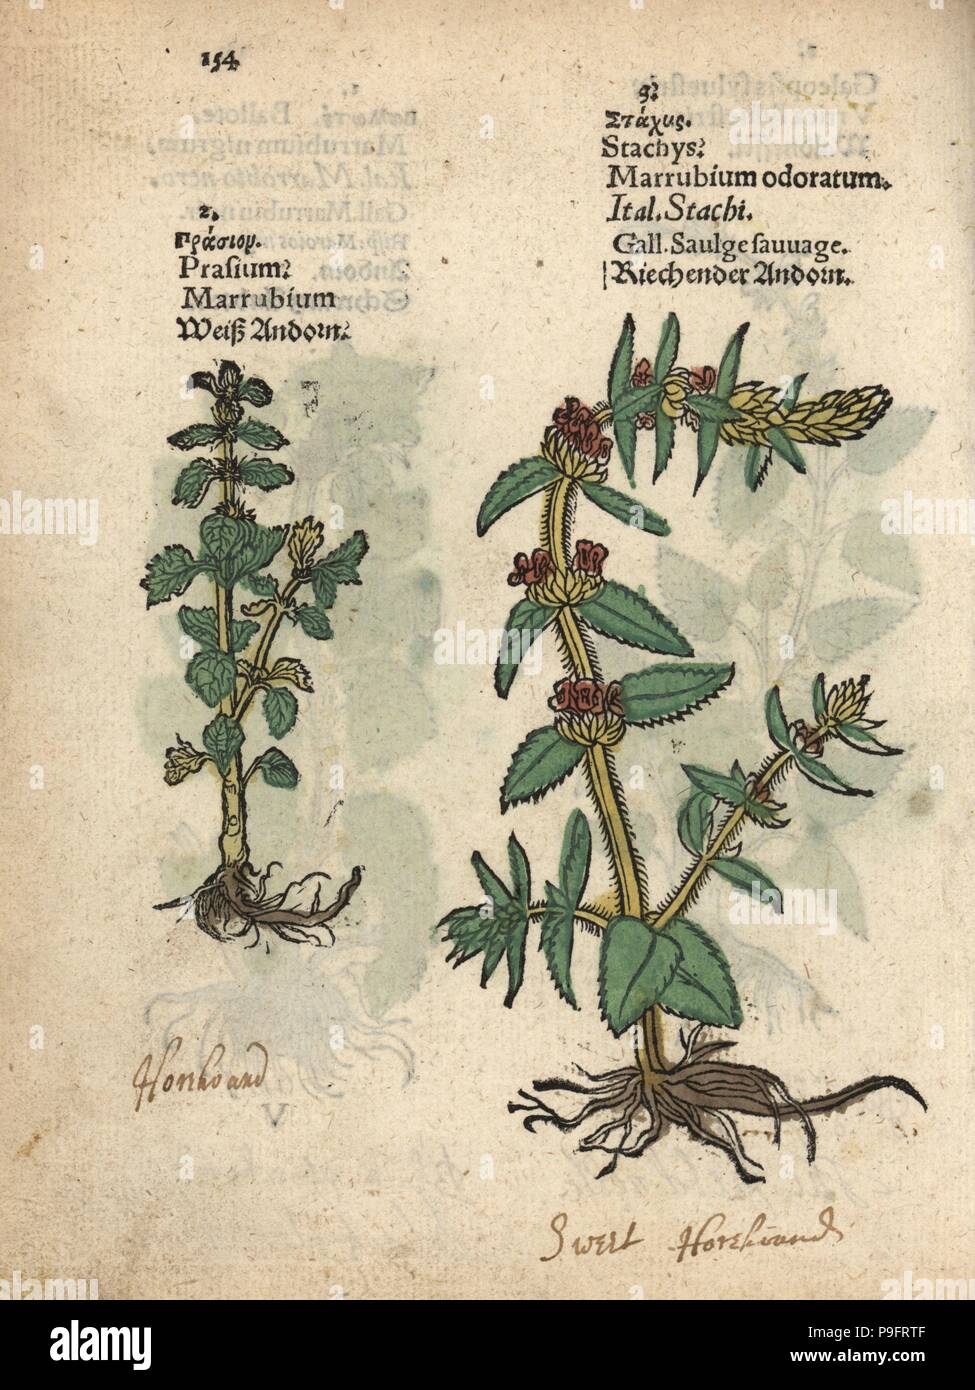 Common horehound, Marrubium vulgare, and downy woundwort, Stachys germanica. Handcoloured woodblock engraving of a botanical illustration from Adam Lonicer's Krauterbuch, or Herbal, Frankfurt, 1557. This from a 17th century pirate edition or atlas of illustrations only, with captions in Latin, Greek, French, Italian, German, and in English manuscript. Stock Photo